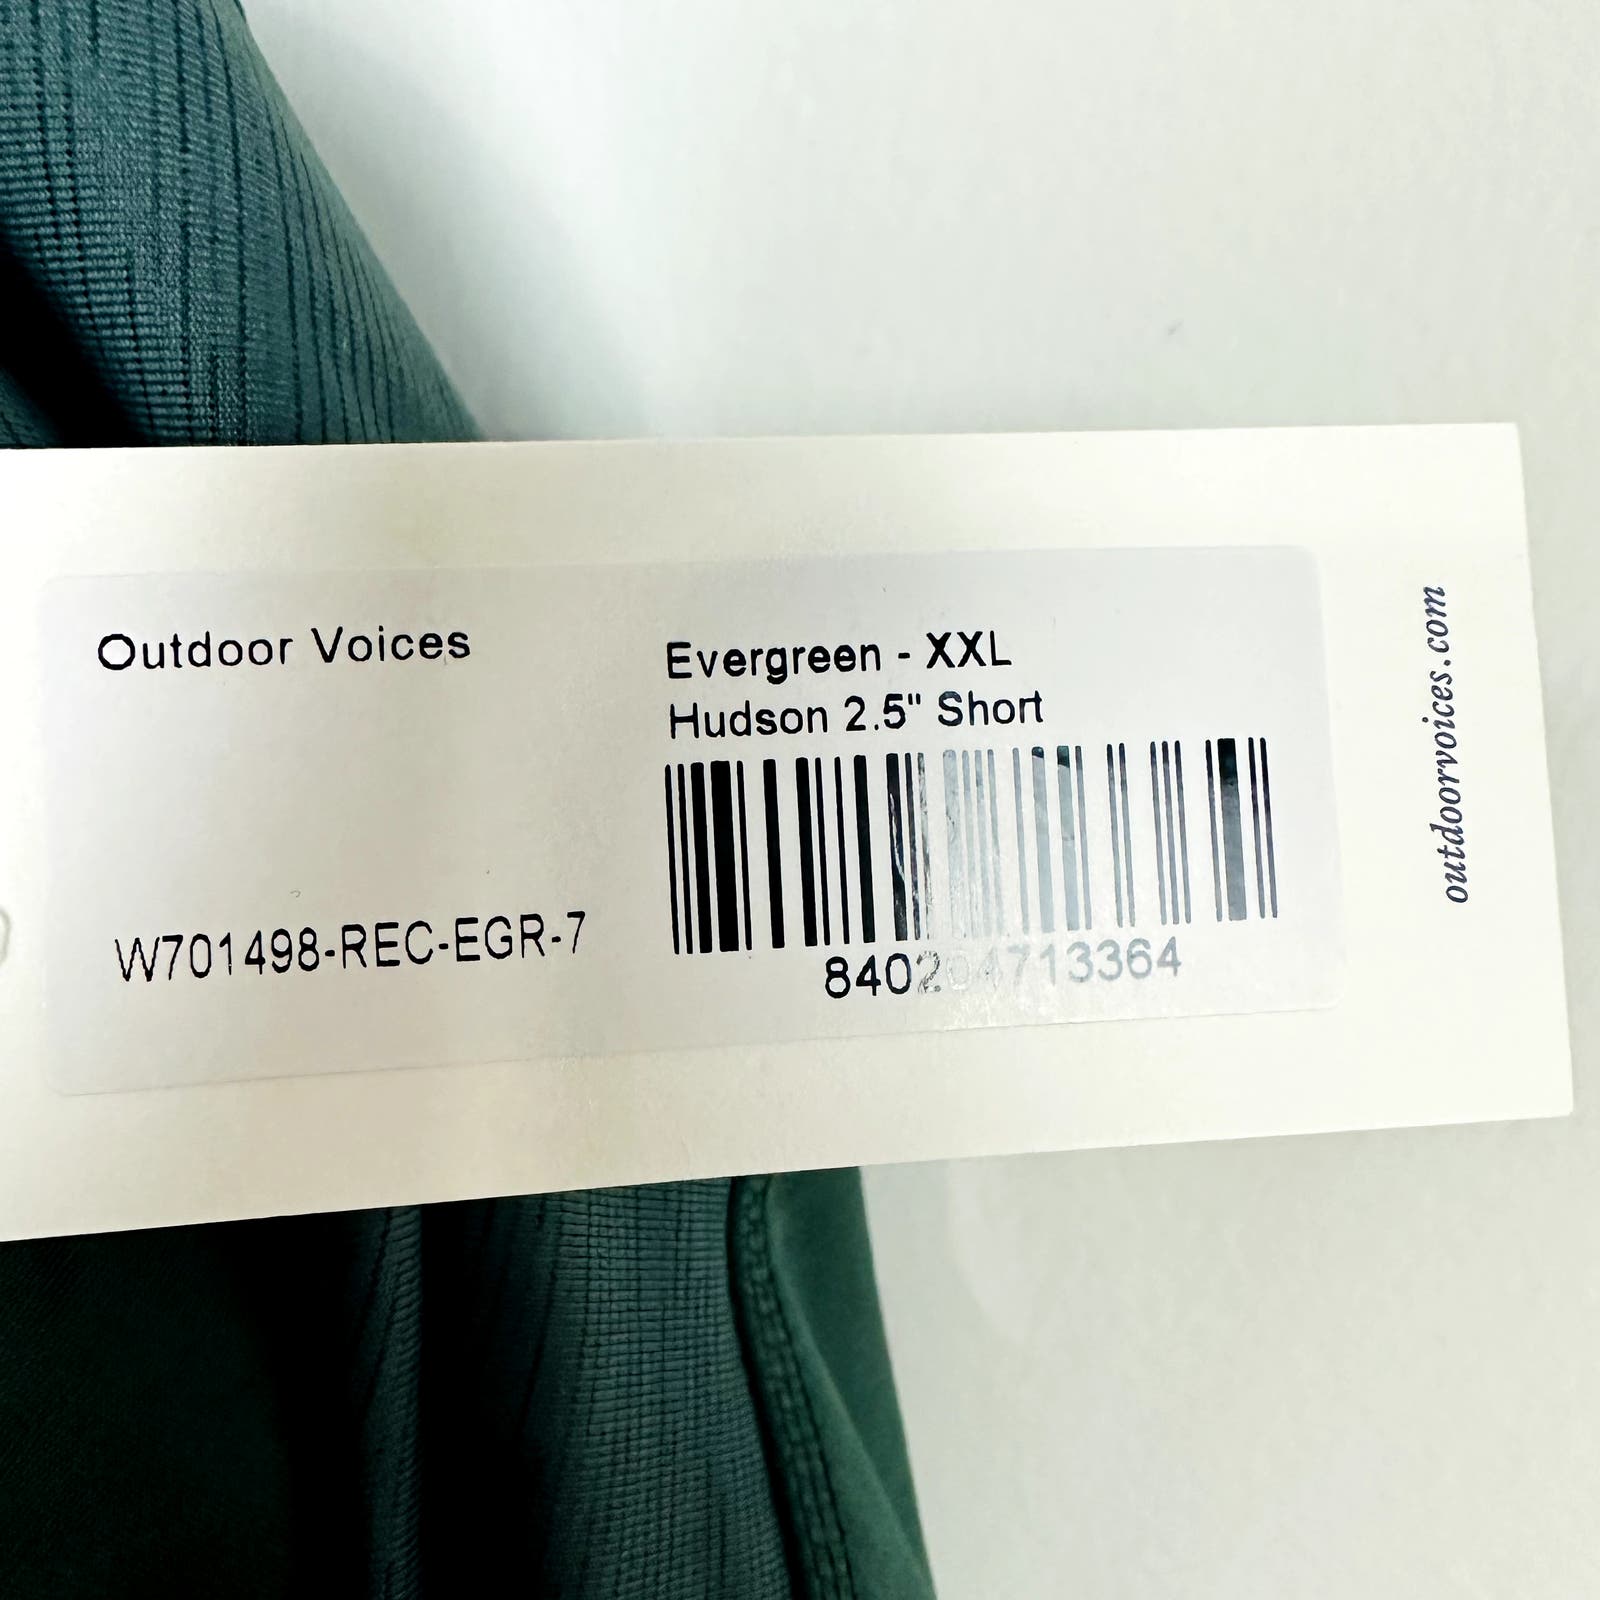 Outdoor Voices NWT Evergreen Mid Rise Hudson 2.5" Short Size 2XL